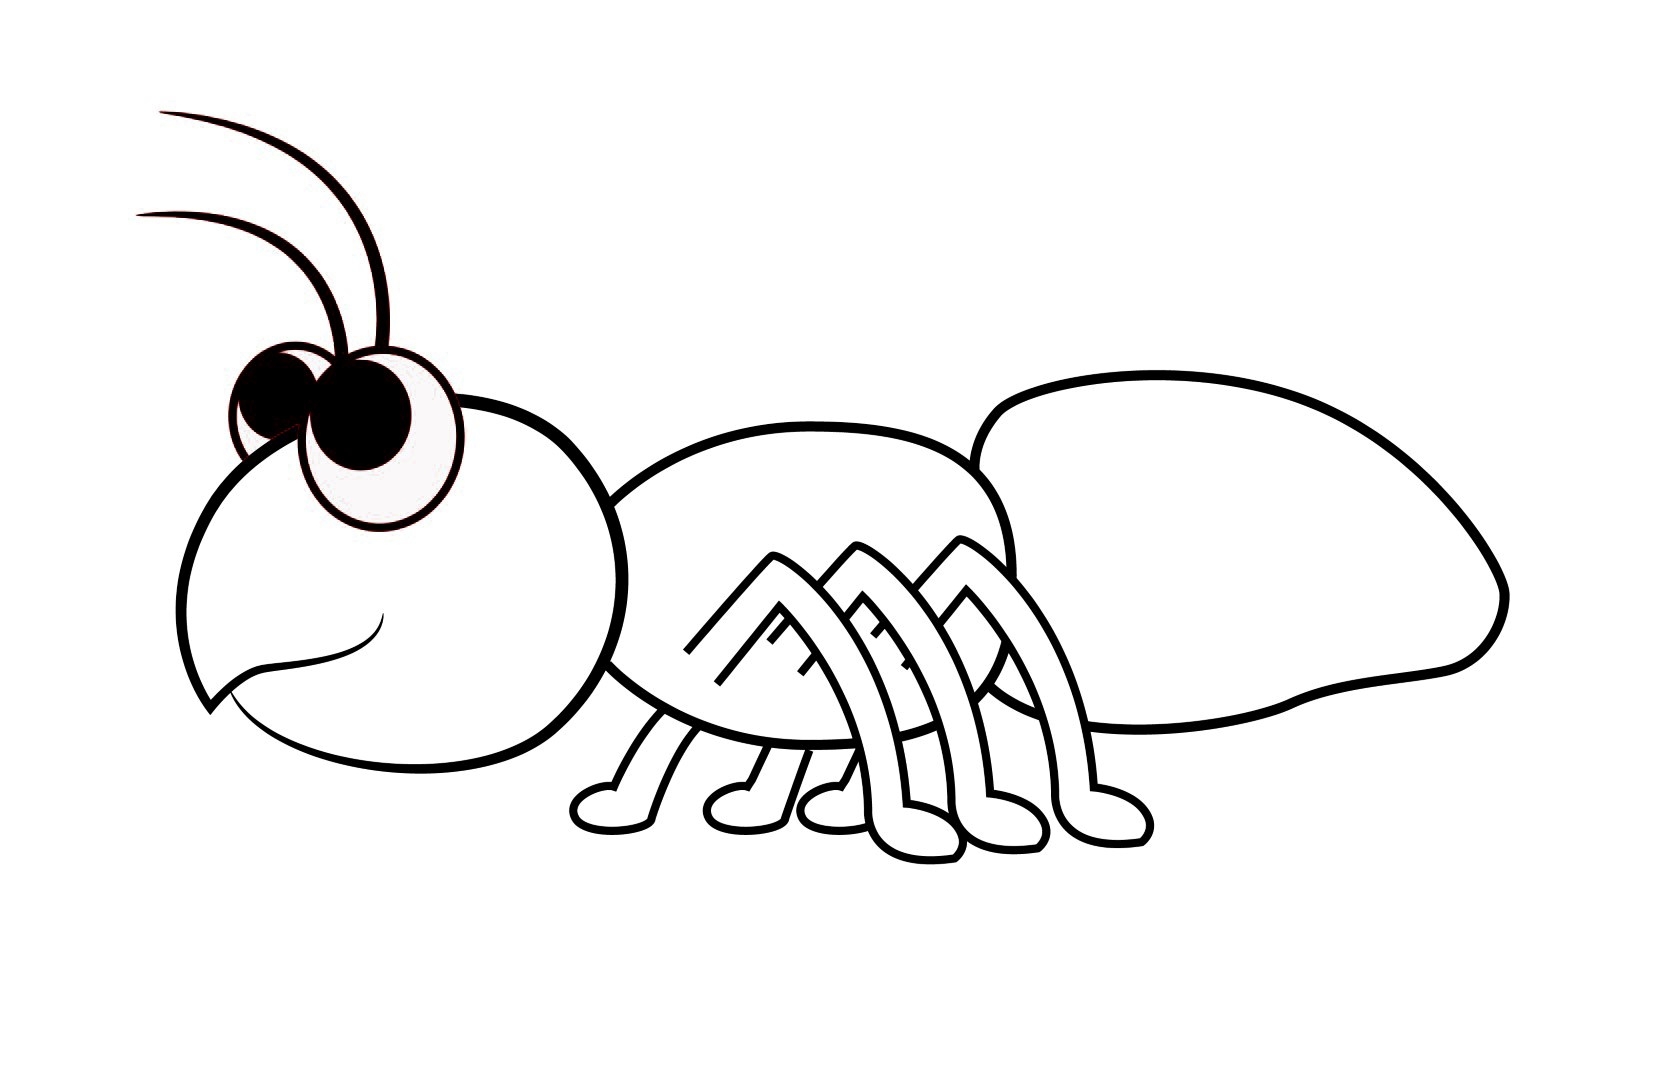 Ant clipart colouring page. Coloring pages for 